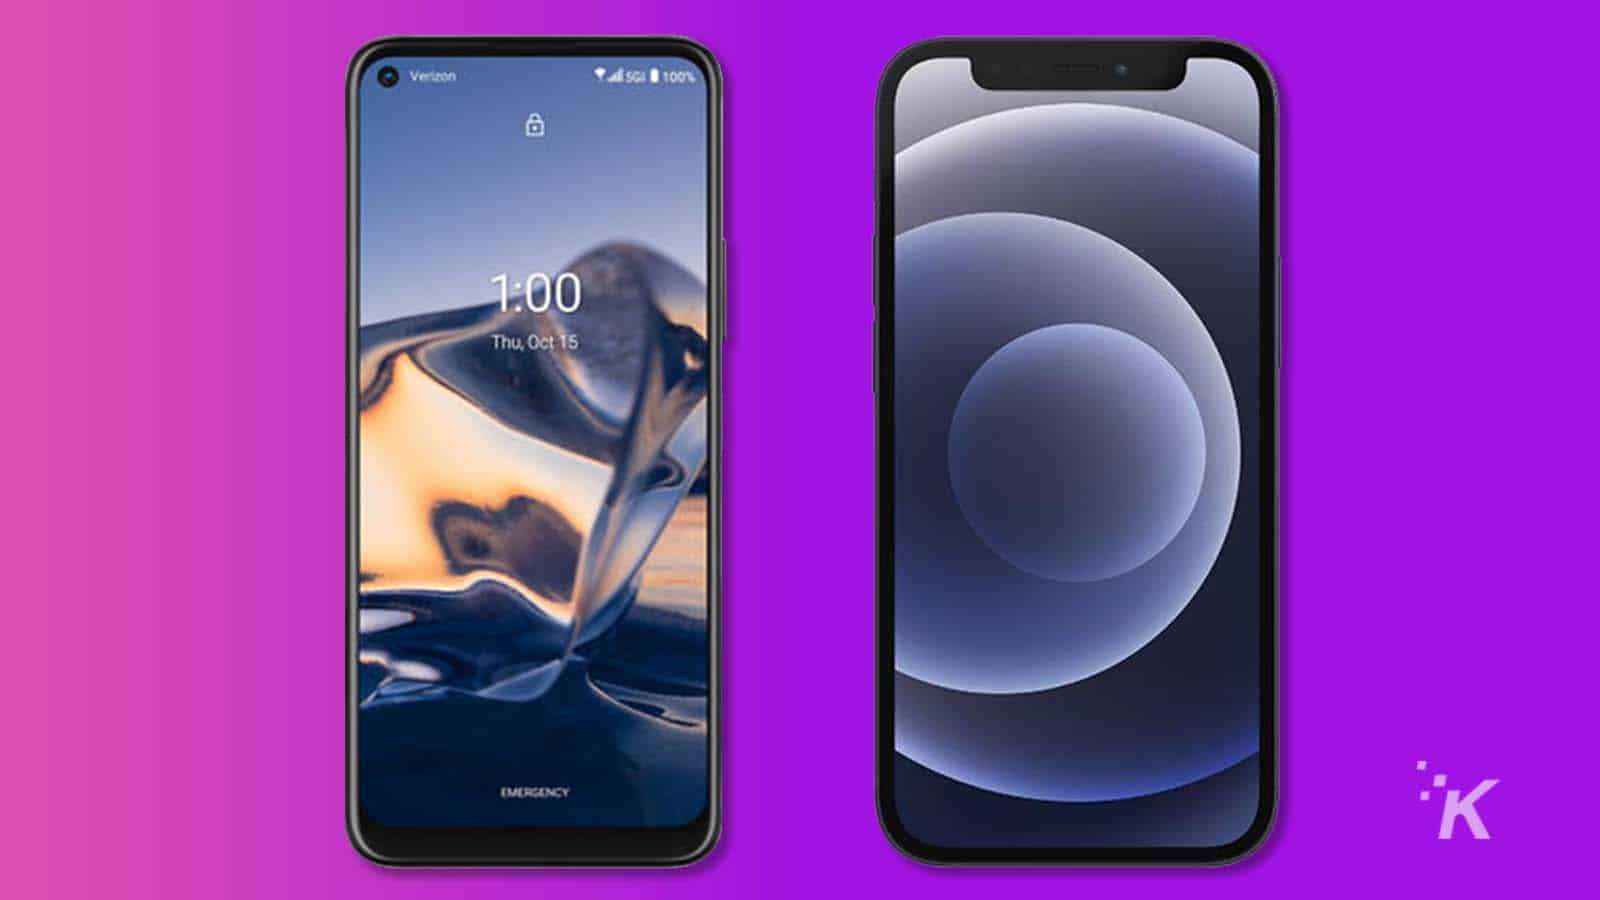 Android and iPhone with live wallpaper in purple background